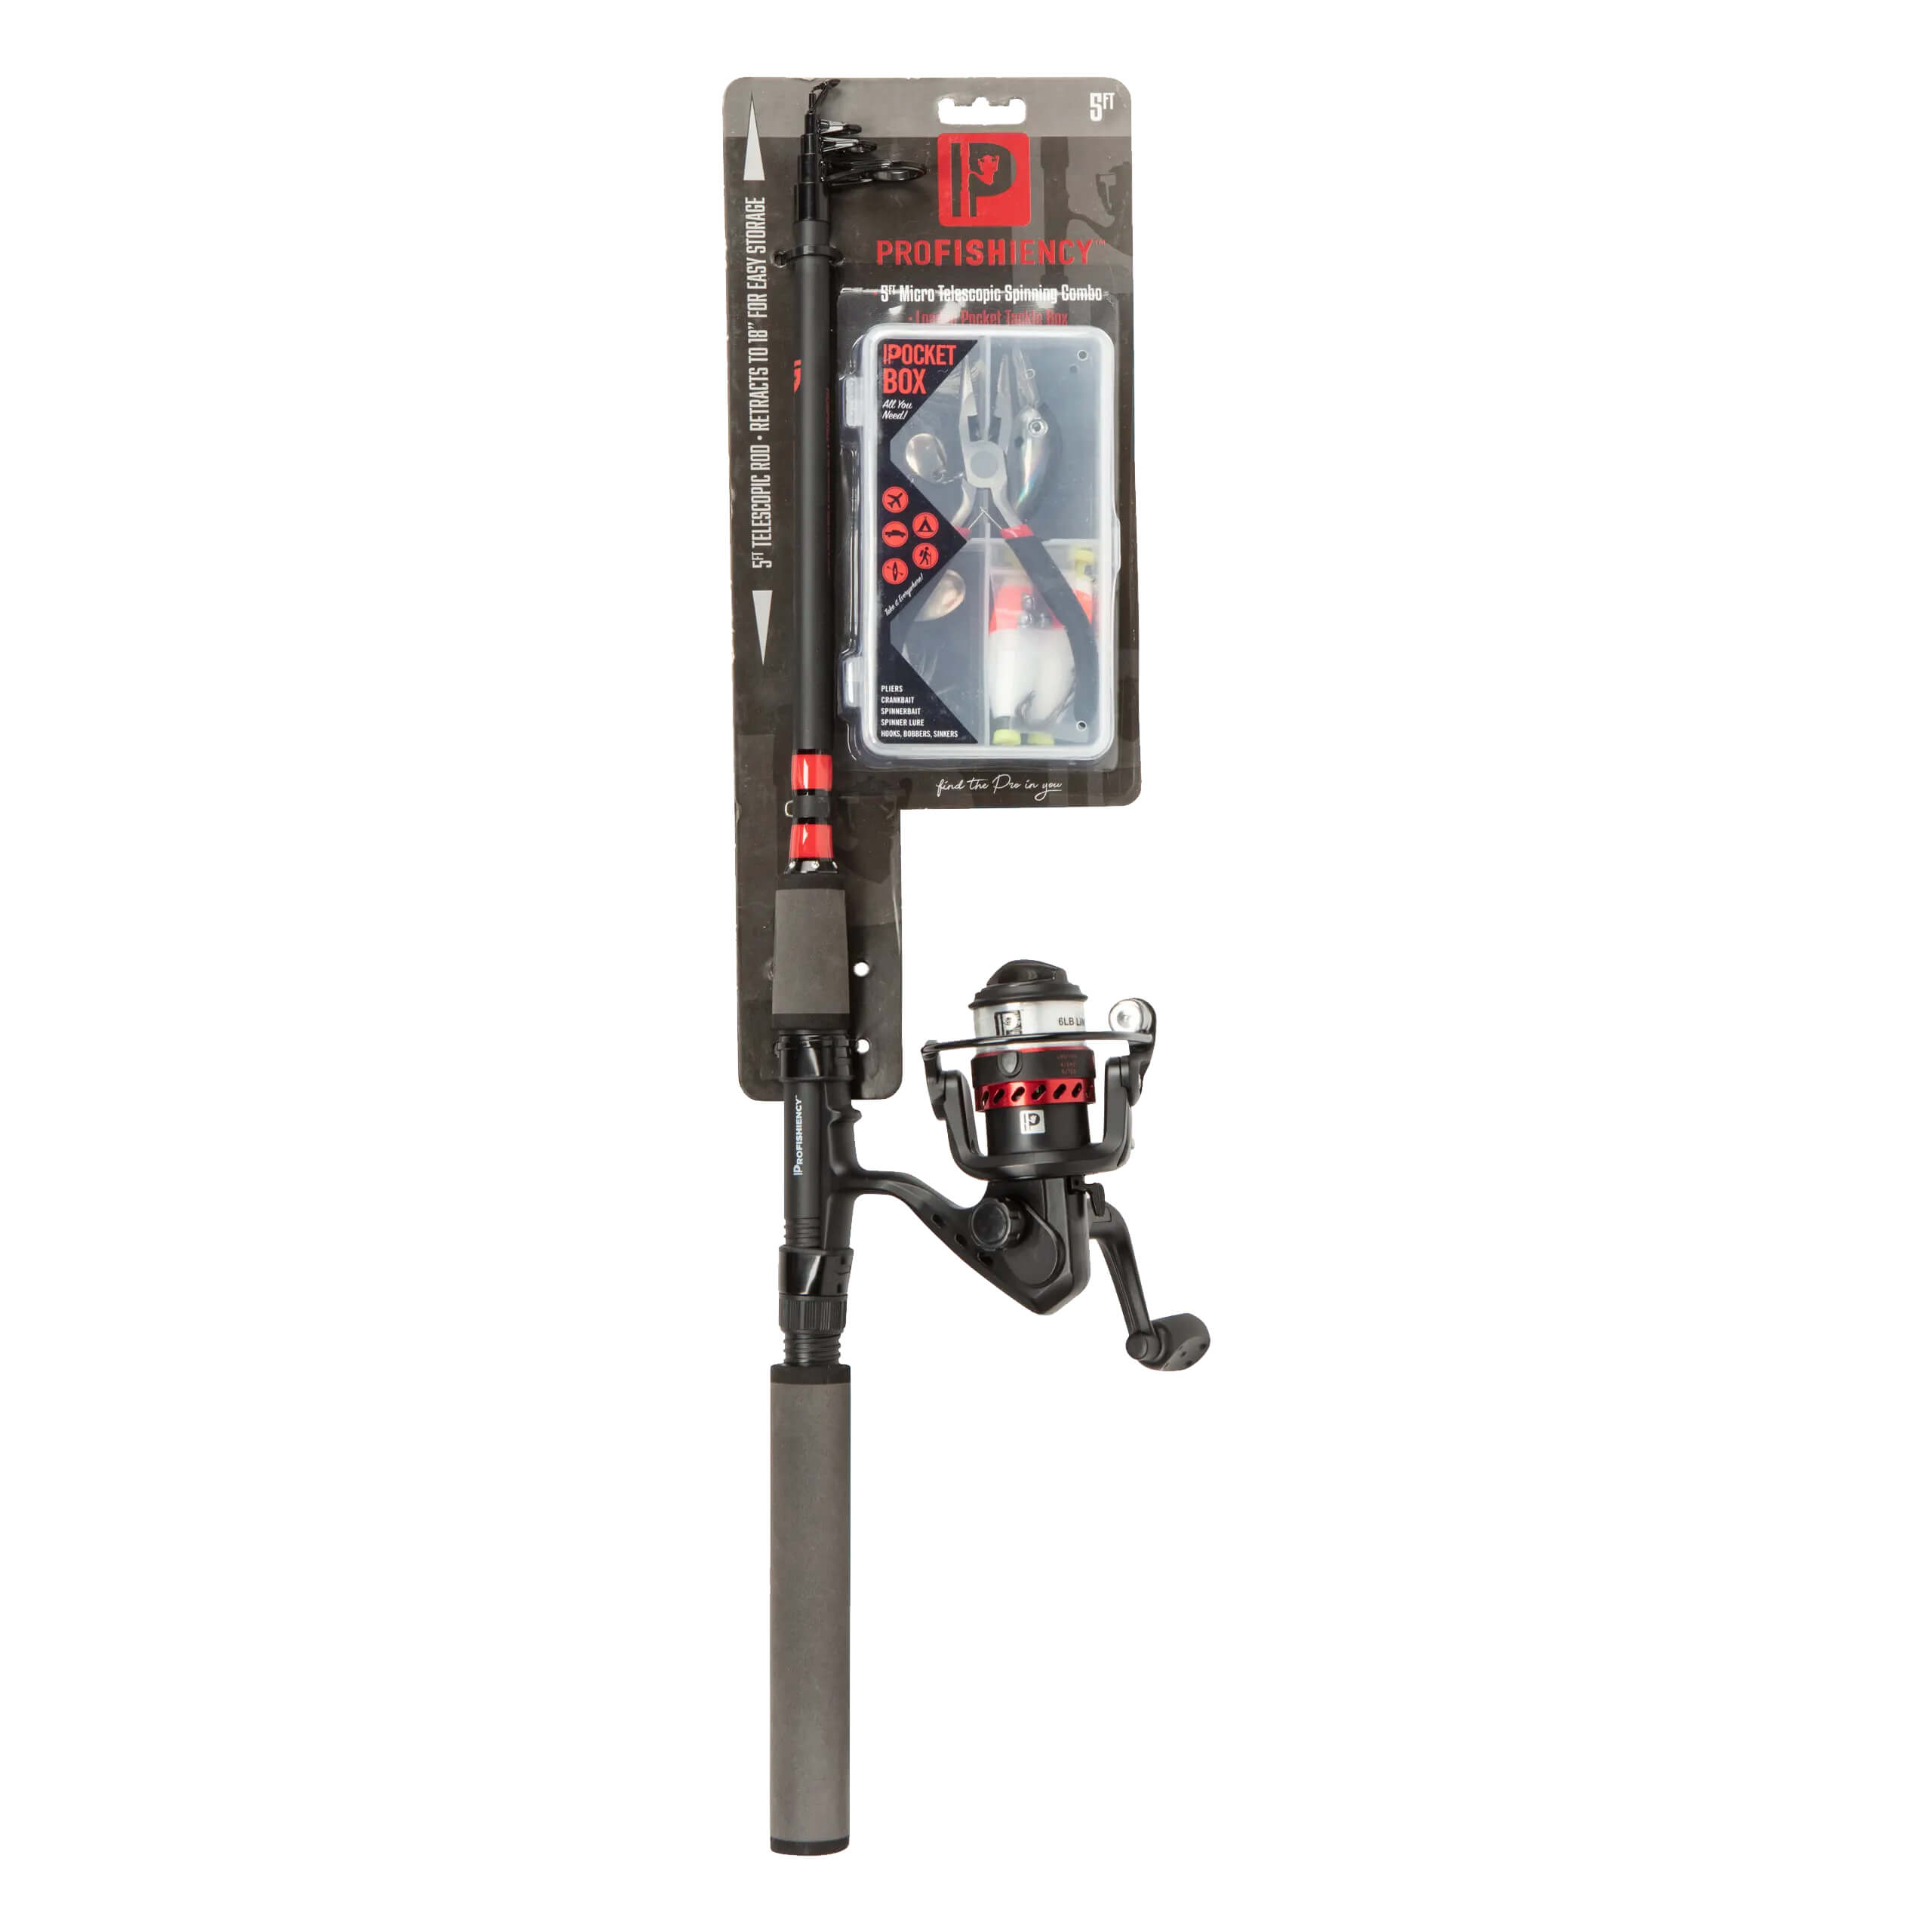 ProFISHiency Pocket Combo Deluxe Travel Kit - 734007, Travel Combos at  Sportsman's Guide